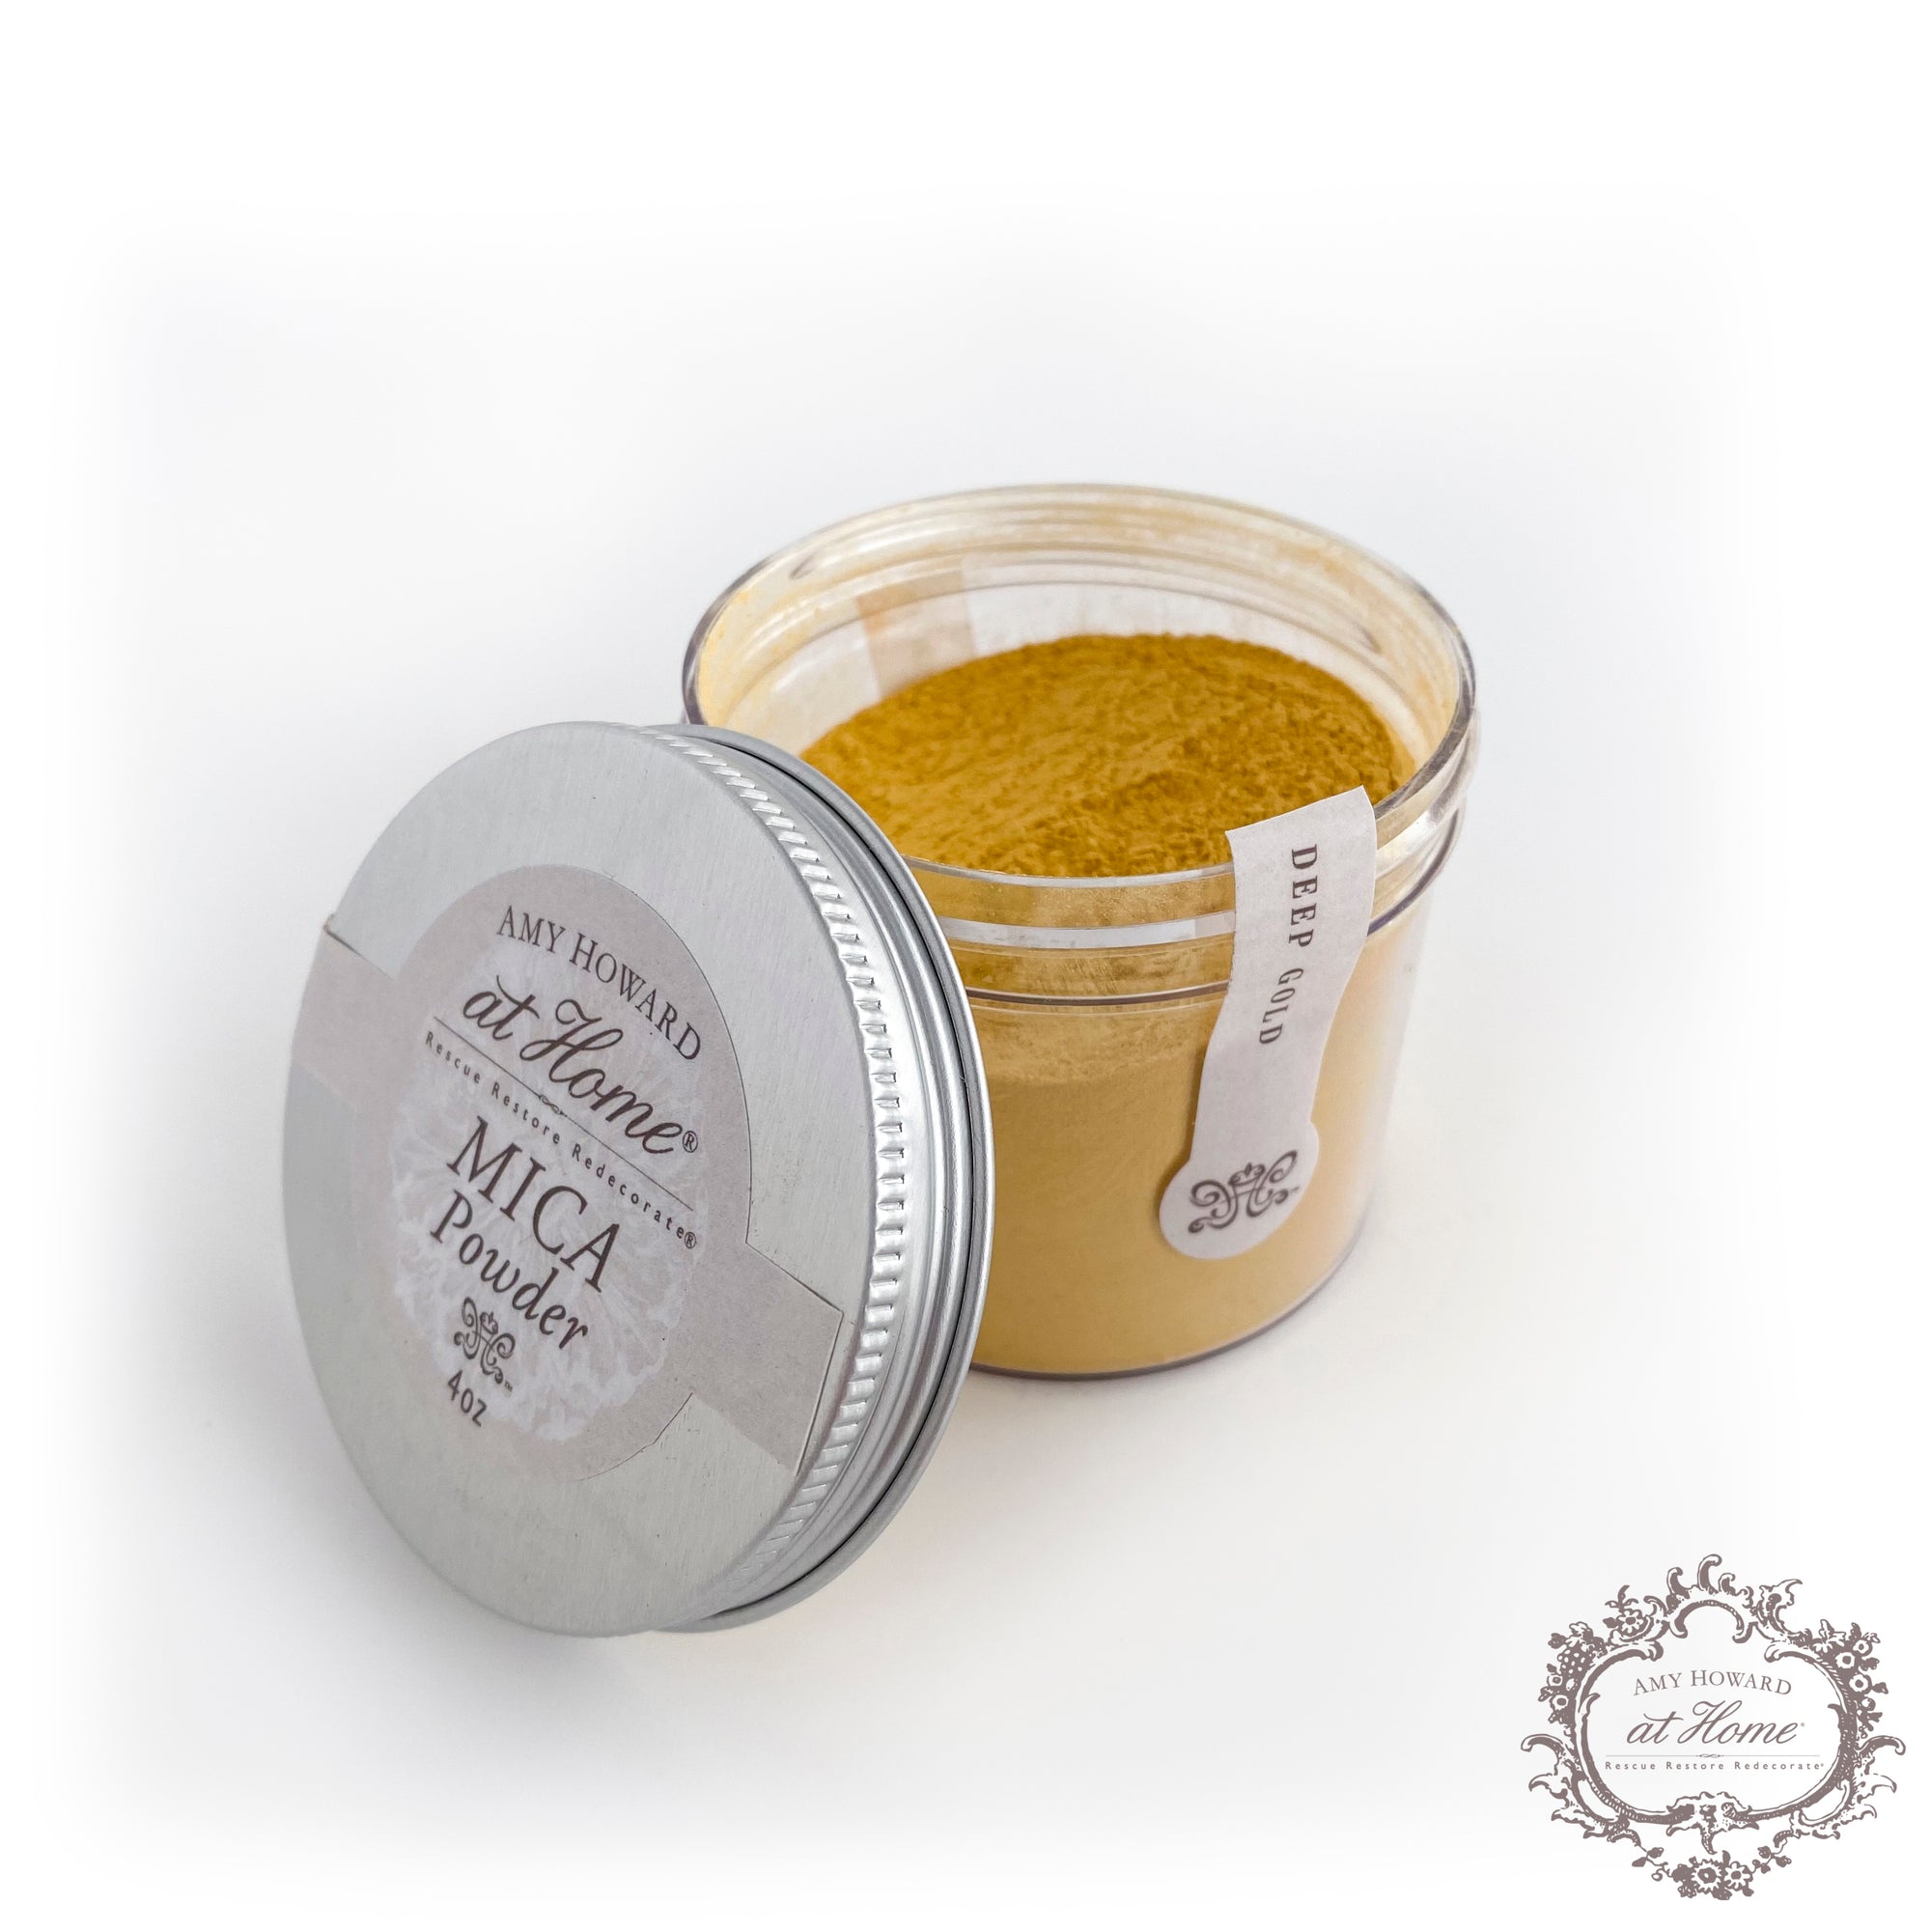 Honey Gold Mica - Micas and More